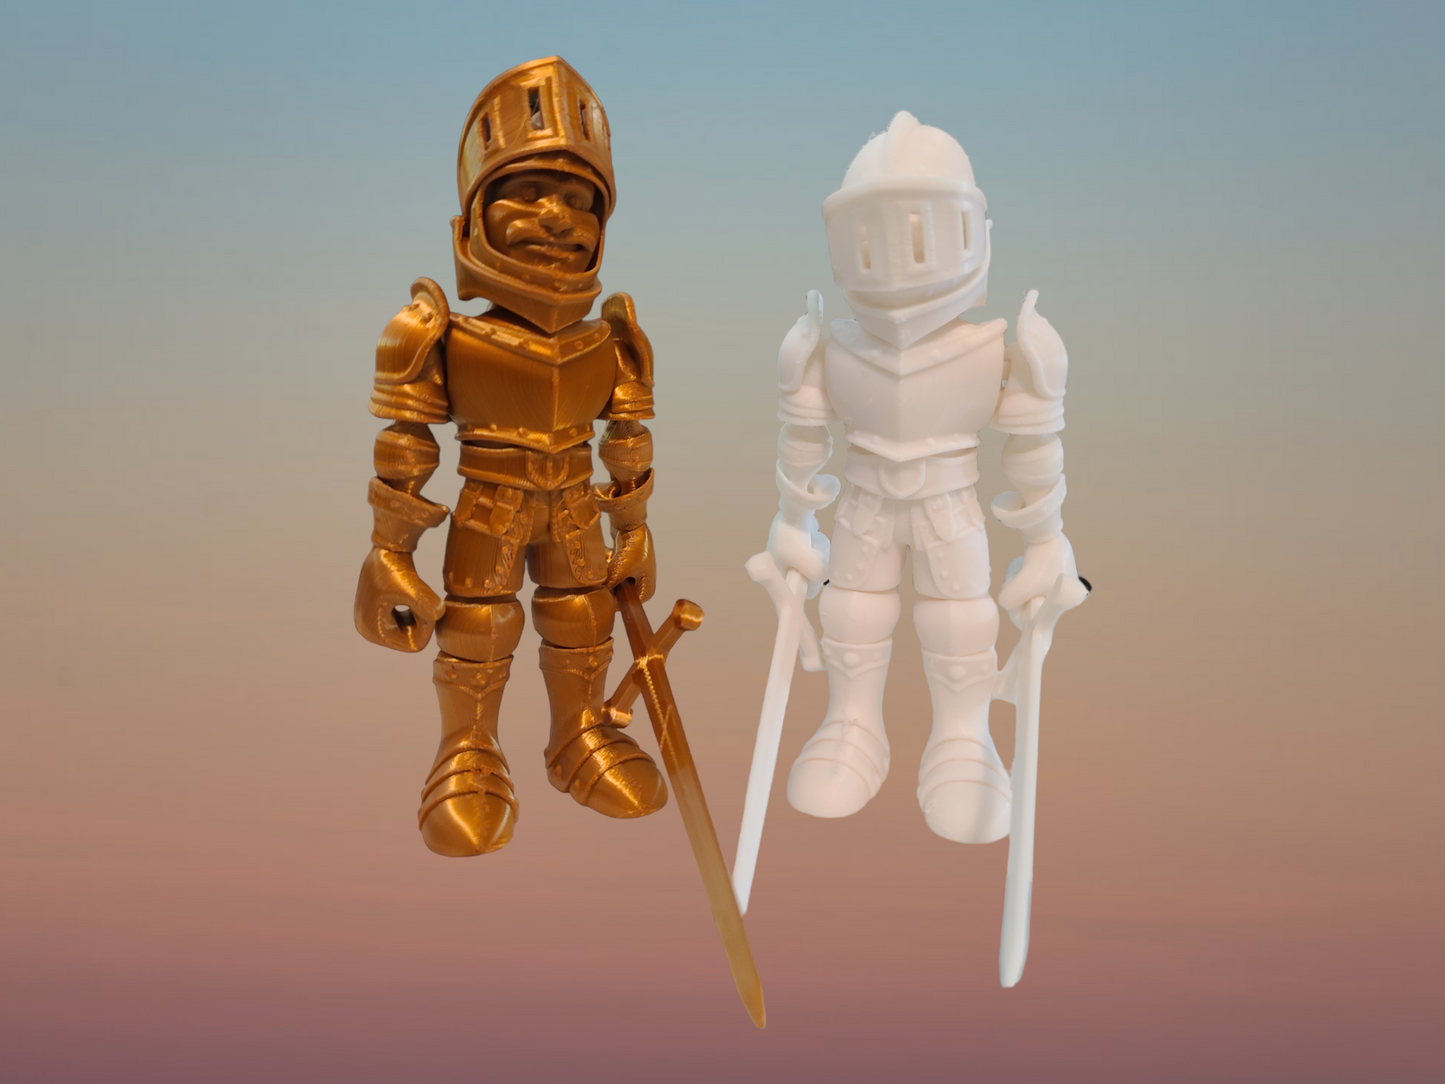 3d print Knight and sword for a child, Easter basket stuffer for kids, birthday gift for husband, Medieval lover gift, teenager gift